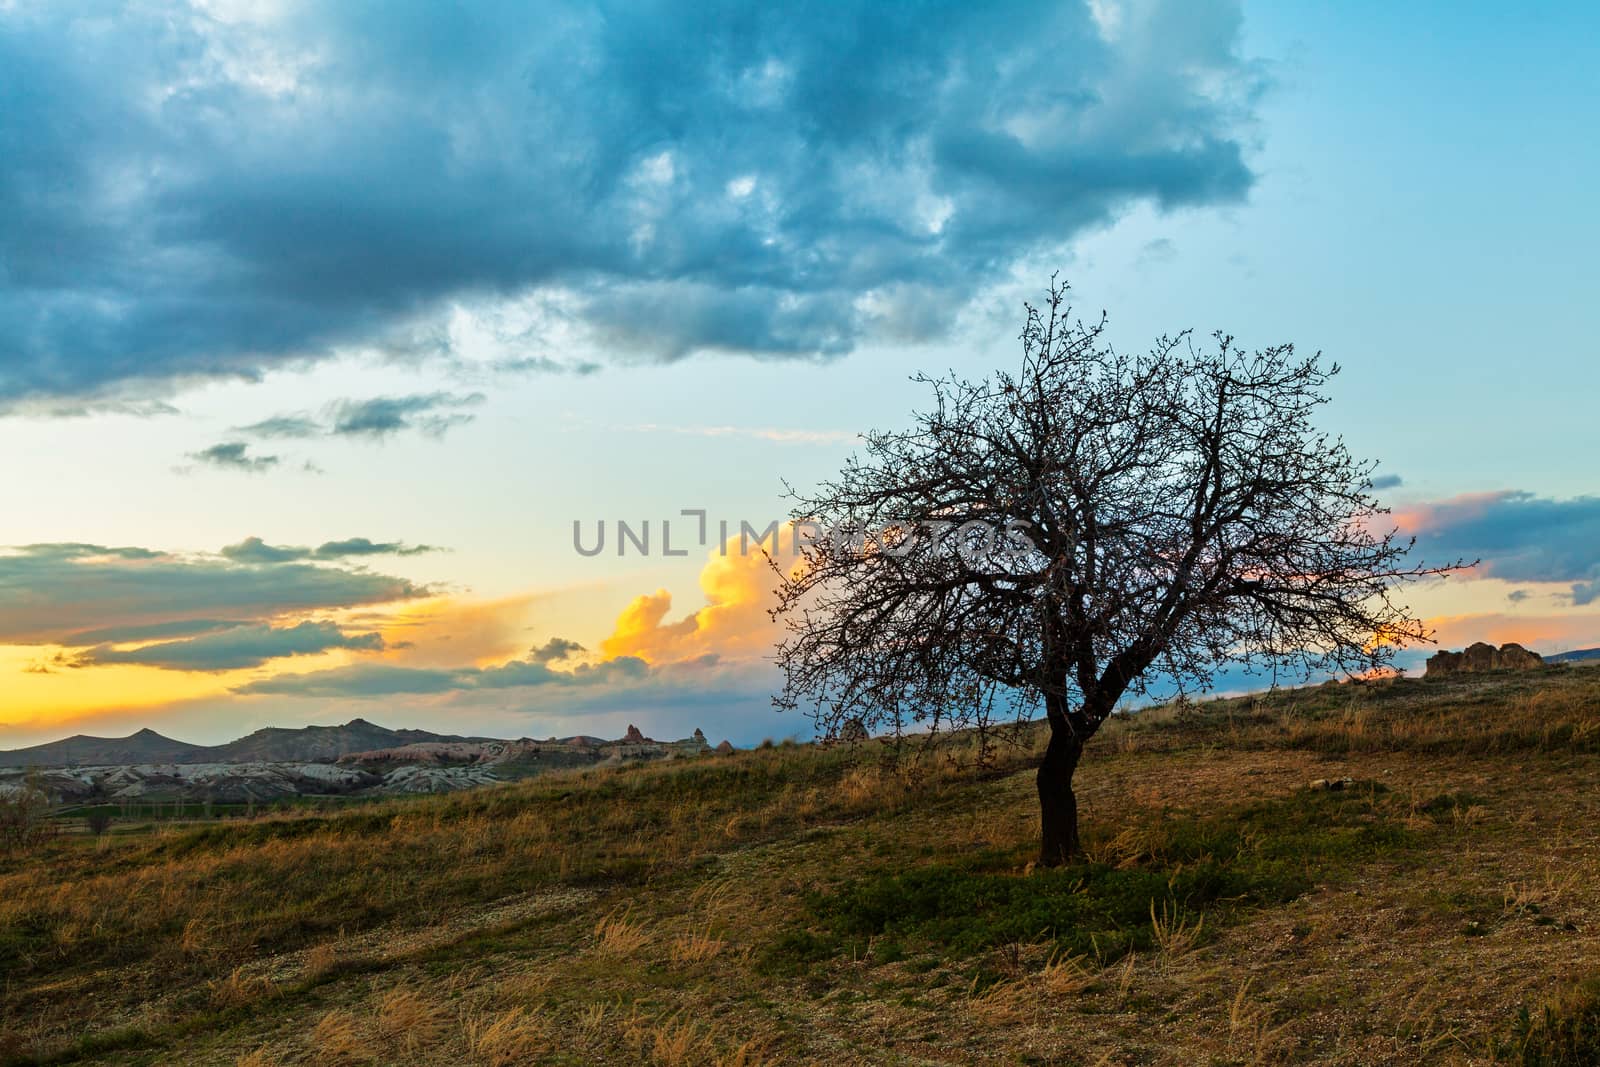 Sunset and lonley tree in the field, beautiful clouds